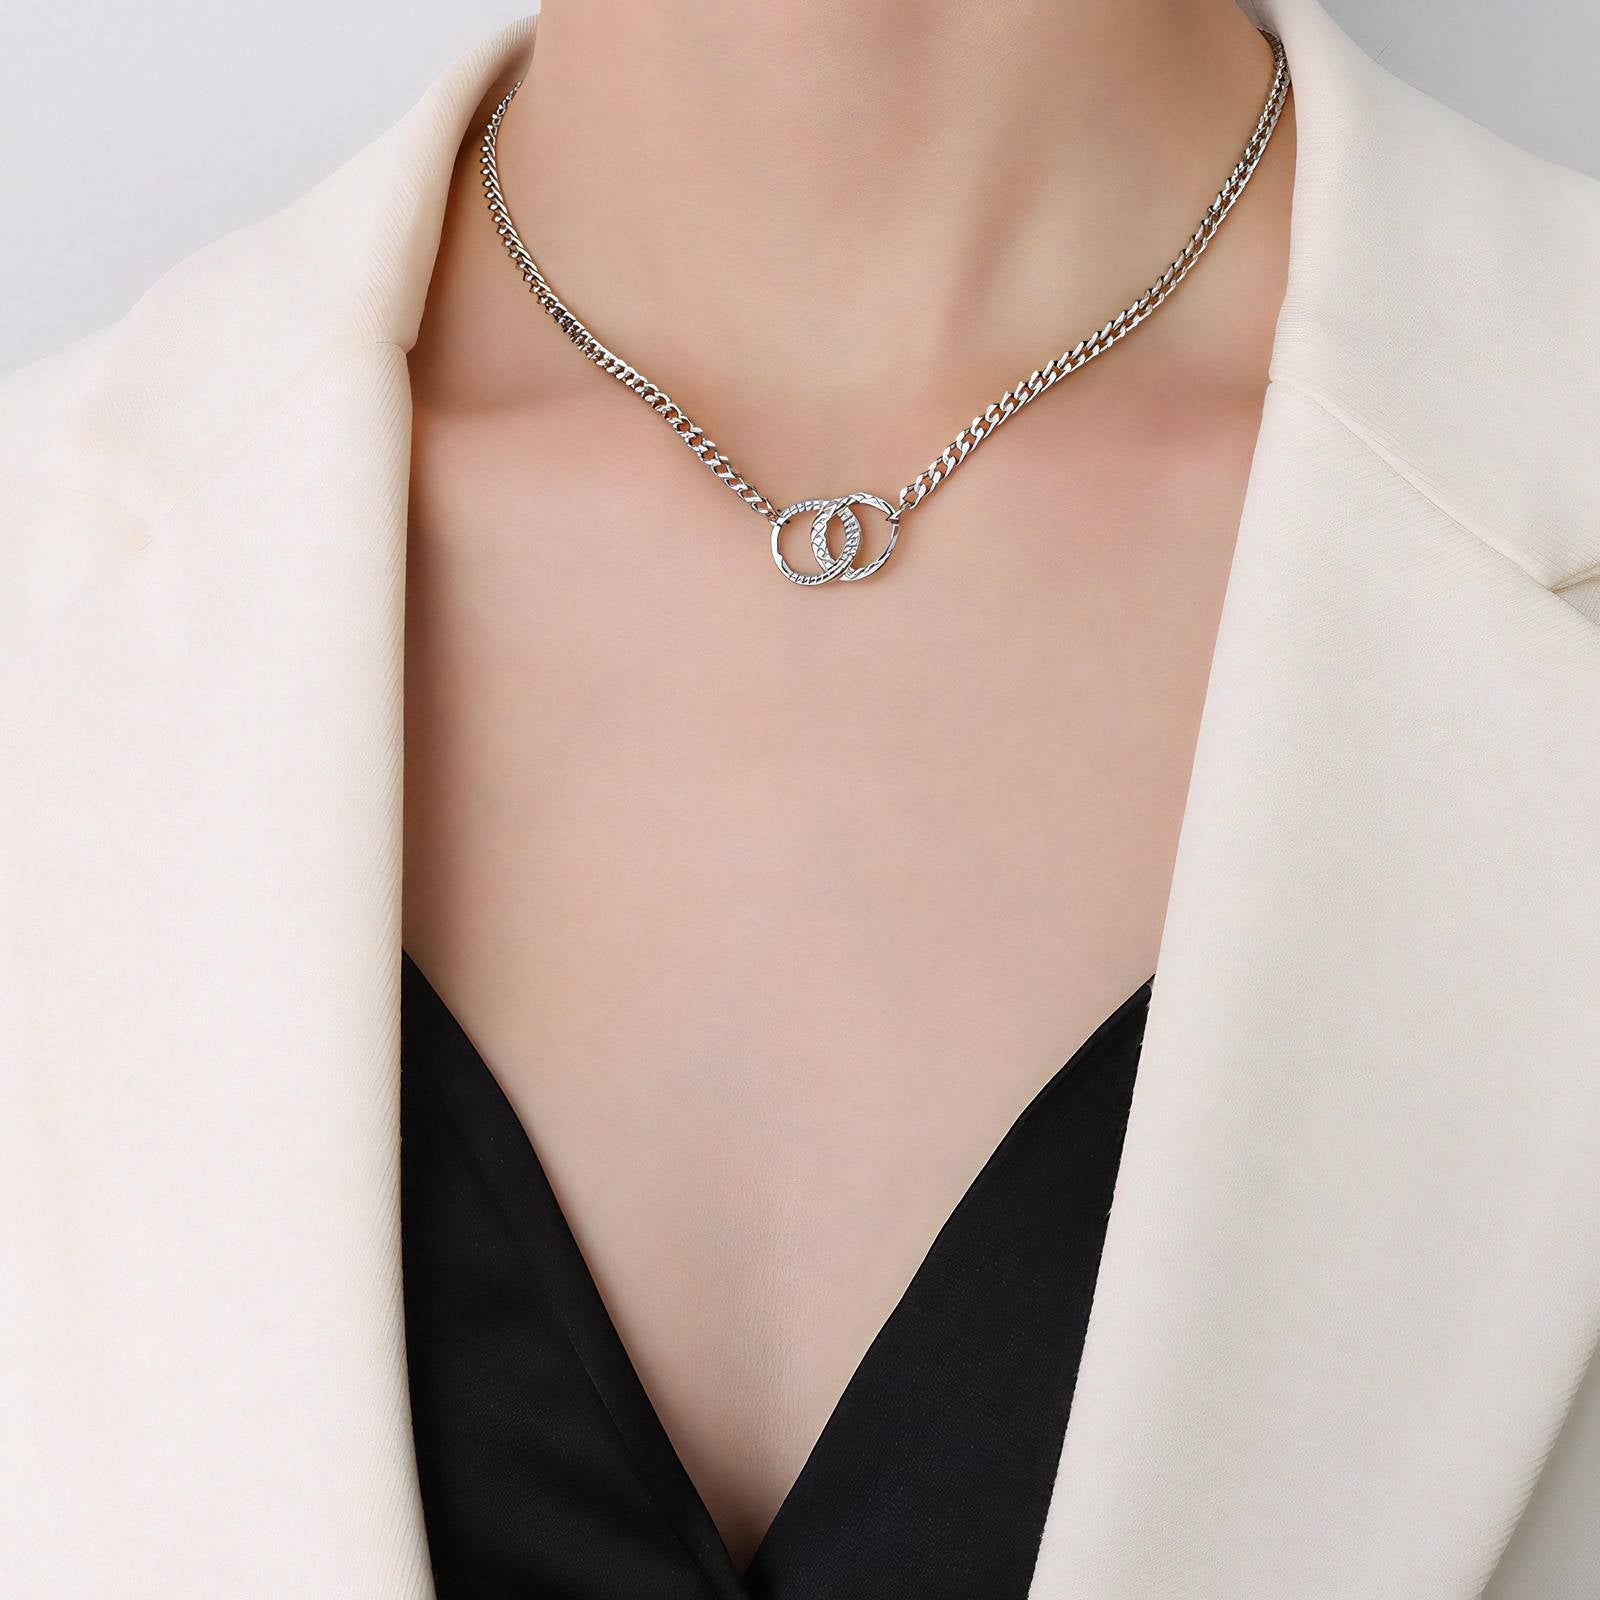 STAINLESS STEEL "INFINITY" NECKLACE